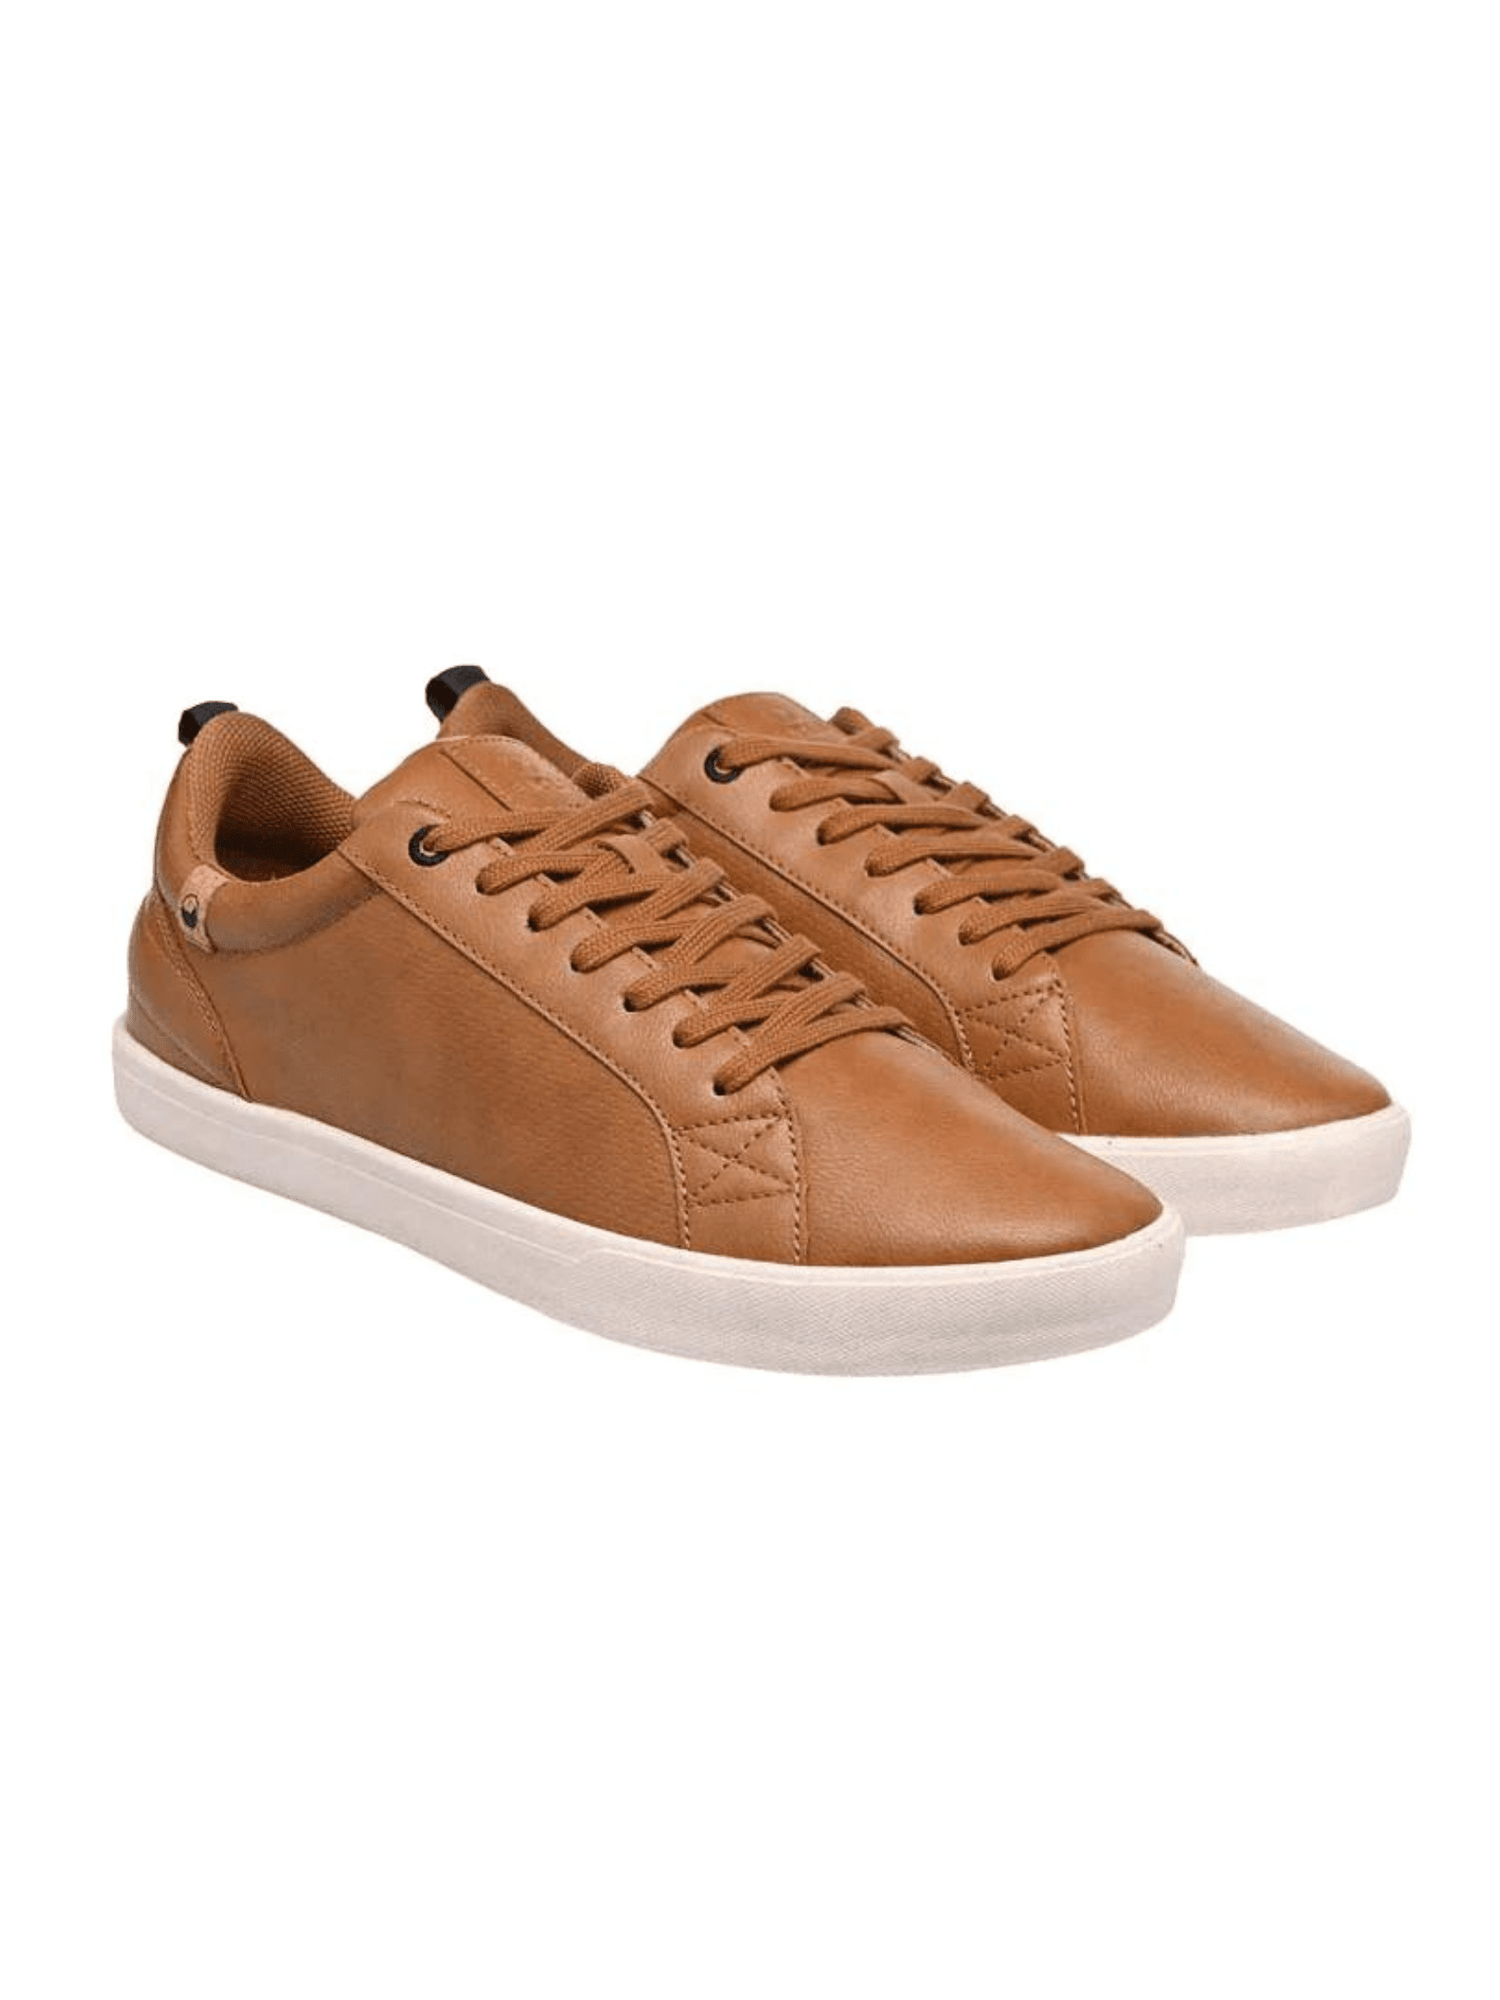 Saola M's Cannon Vegan Leather - Recycled PET Camel Shoes